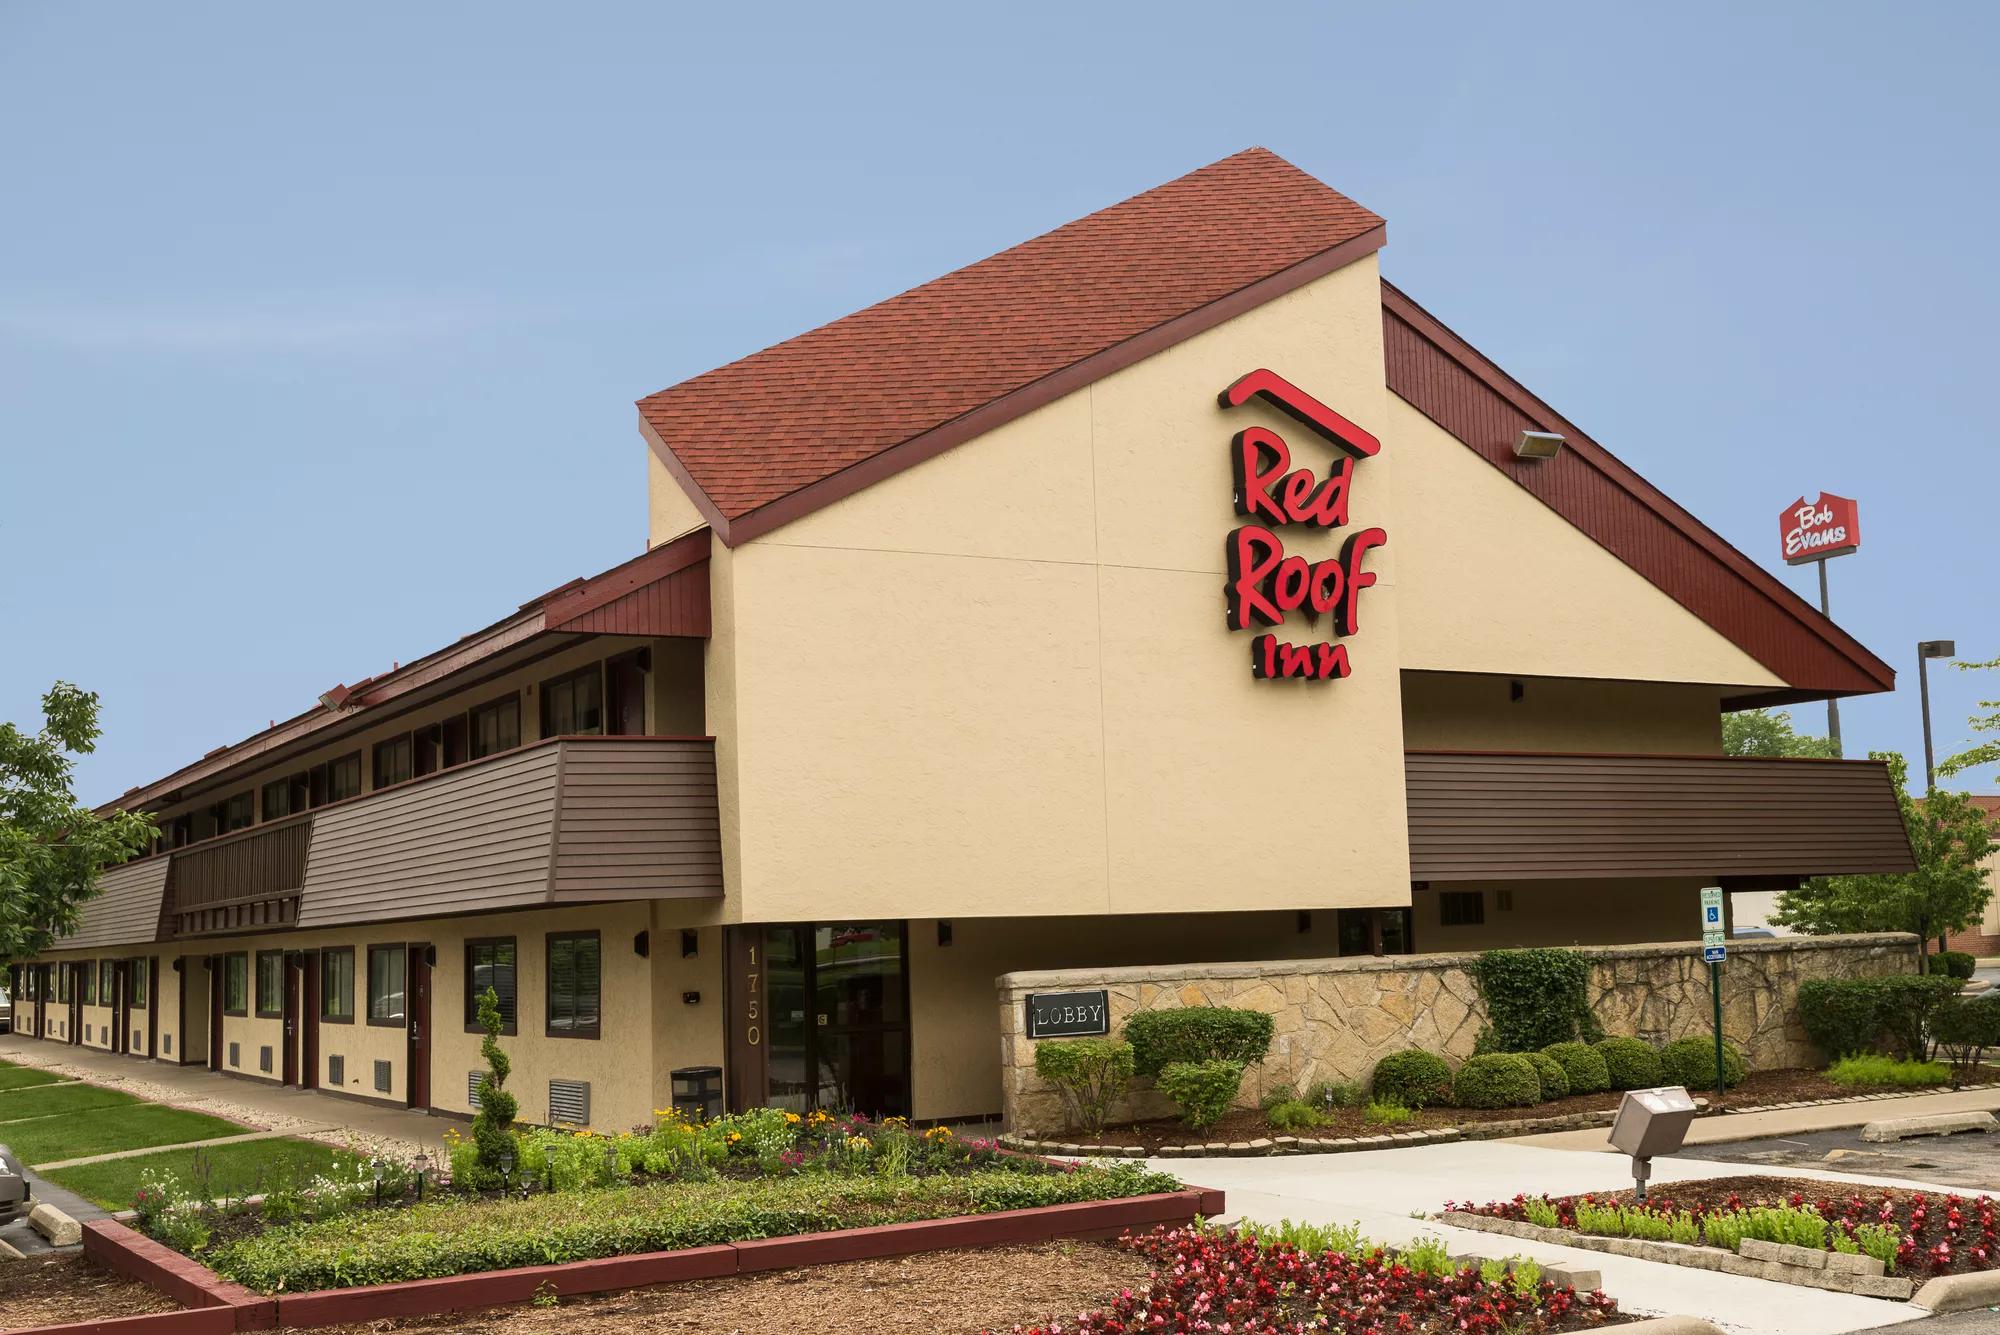 Red Roof Inn Chicago - Joliet Property Exterior Image